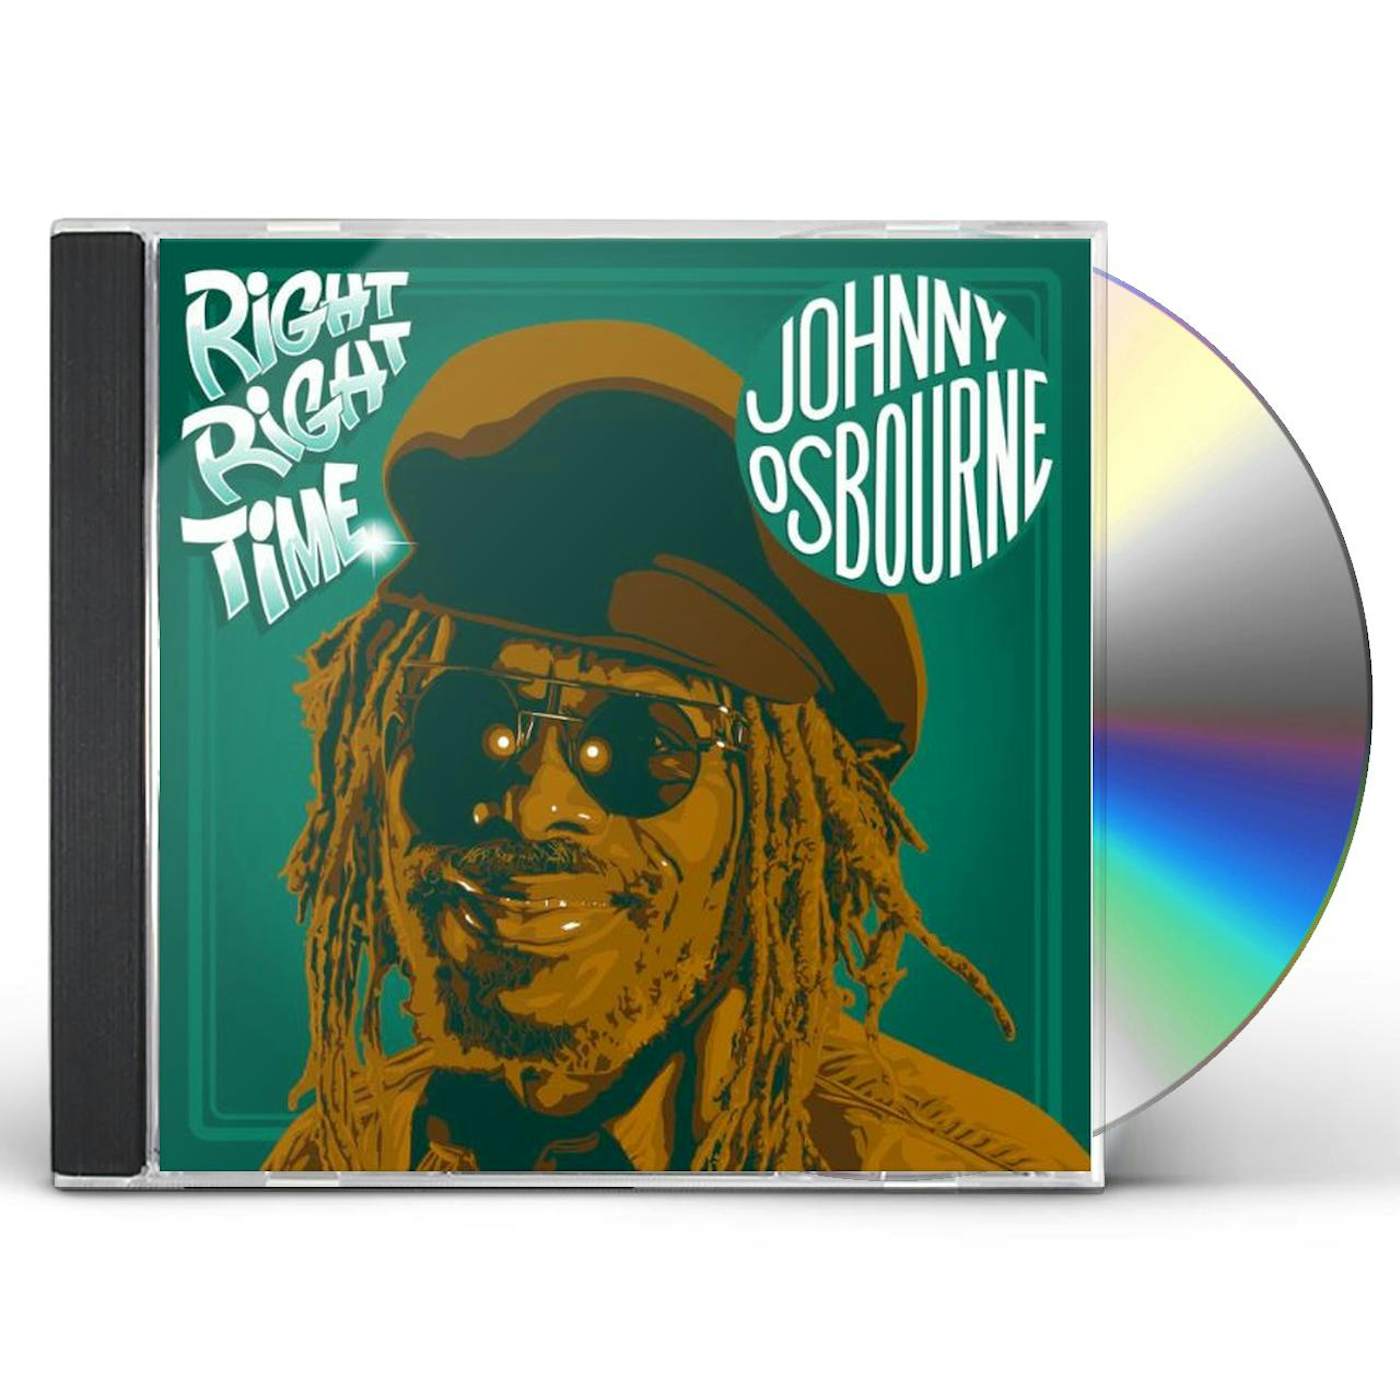 Johnny Osbourne RIGHT RIGHT TIME CD